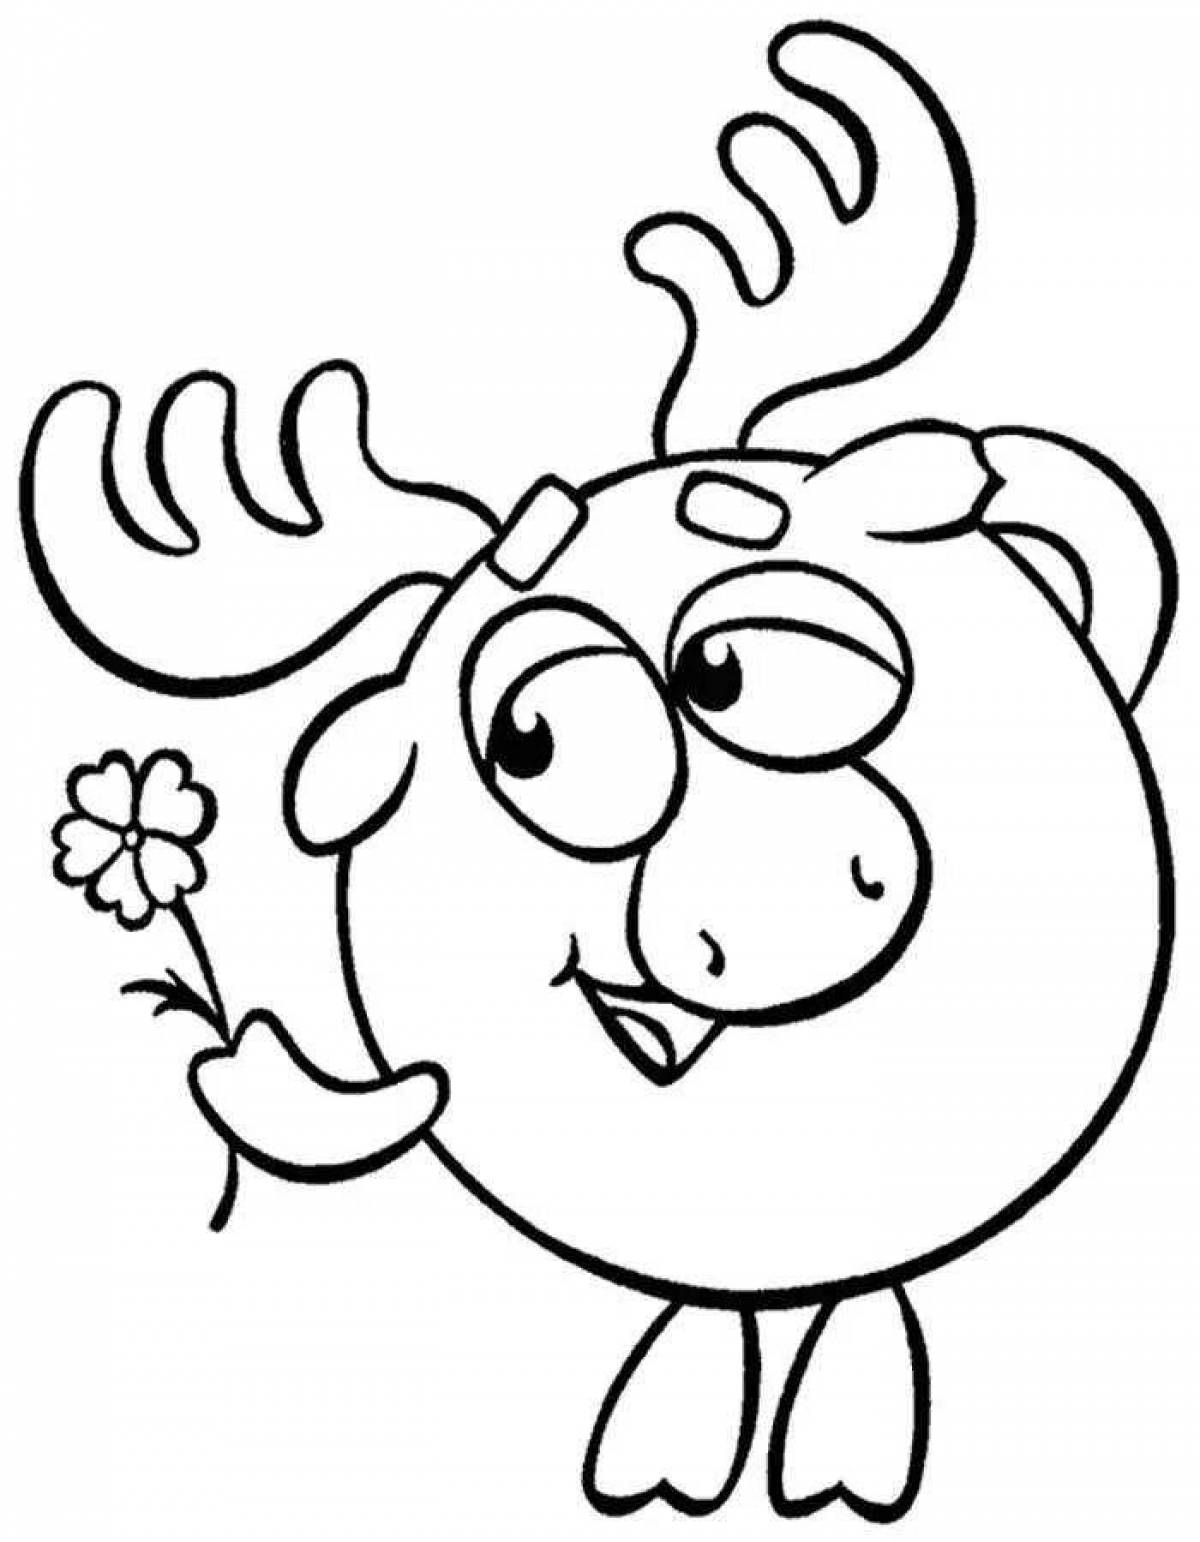 Unusual smeshariki coloring pages